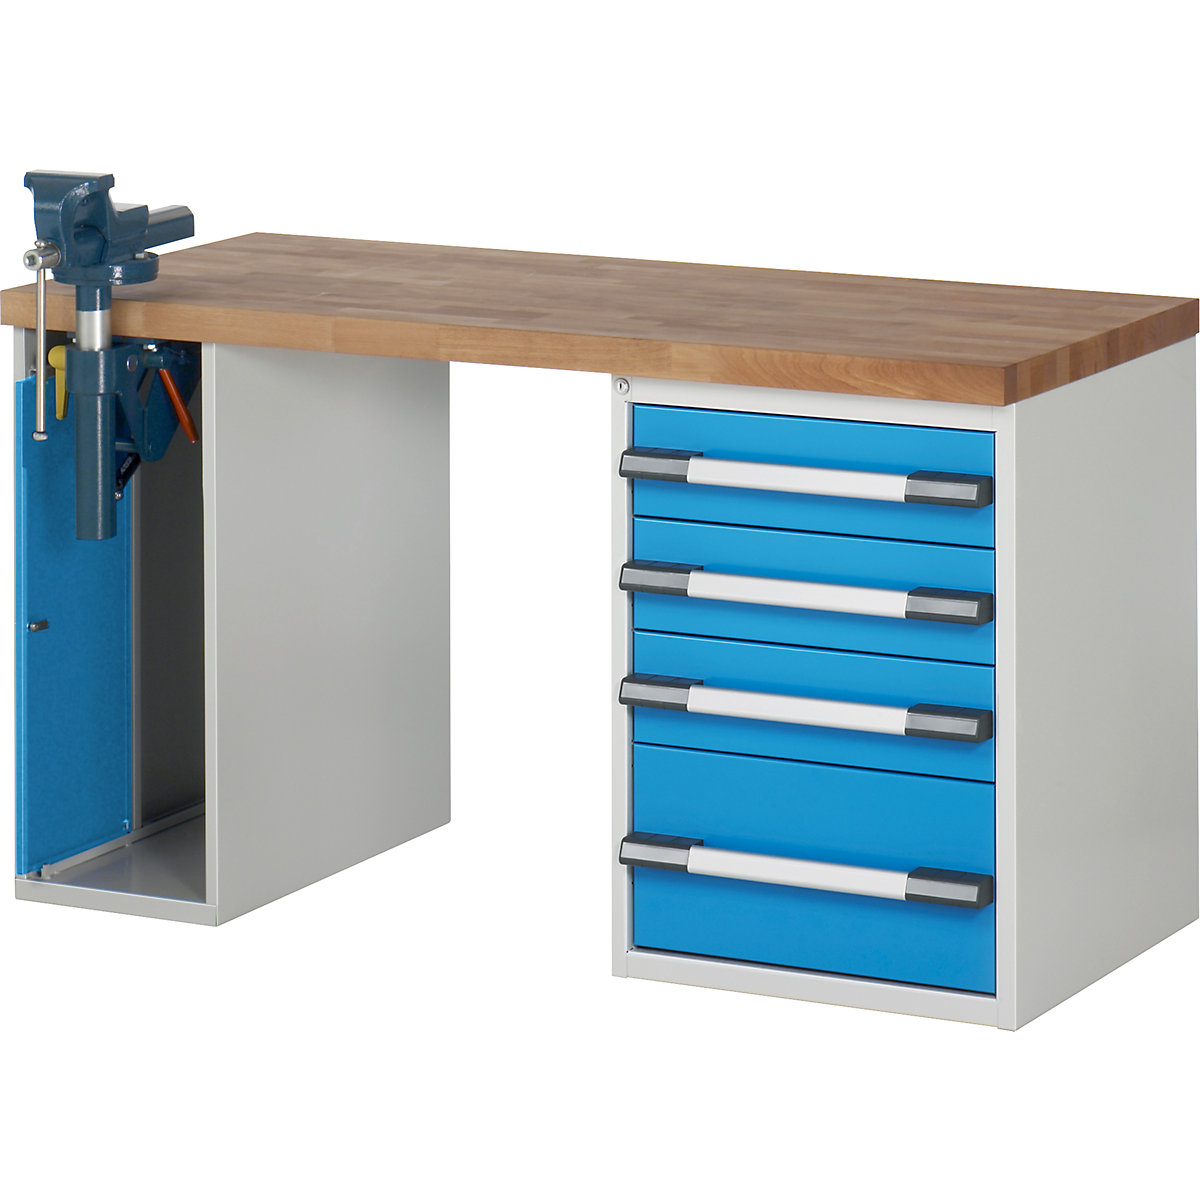 Workbench, Series 7 modular system – eurokraft pro, 1 cupboard, 1 fixed pedestal with 4 drawers, WxD 1500 x 700 mm-8